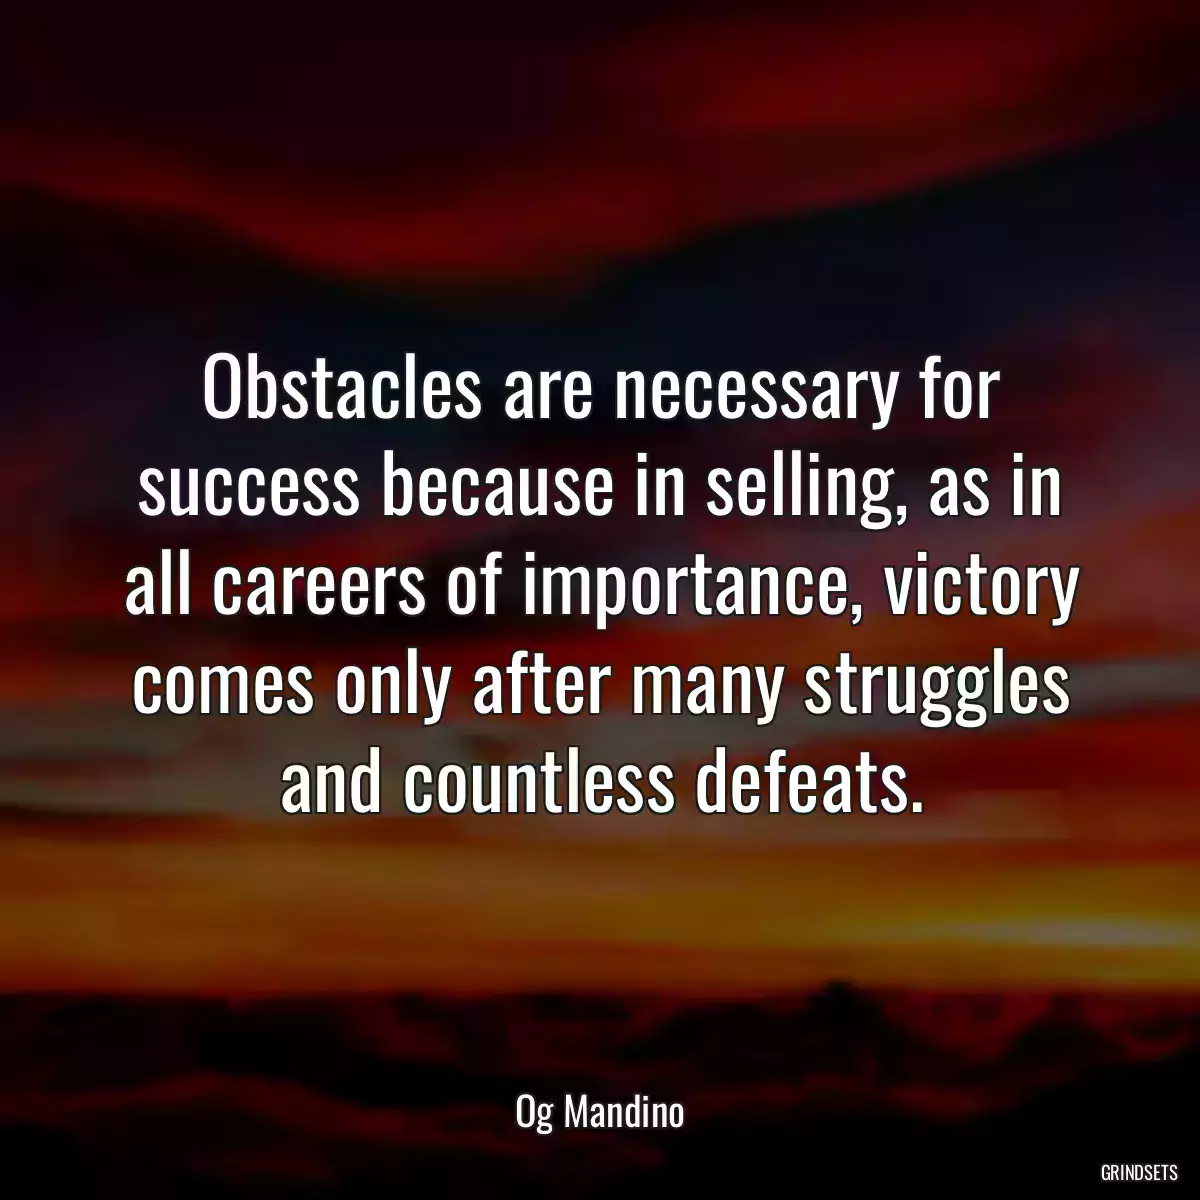 Obstacles are necessary for success because in selling, as in all careers of importance, victory comes only after many struggles and countless defeats.